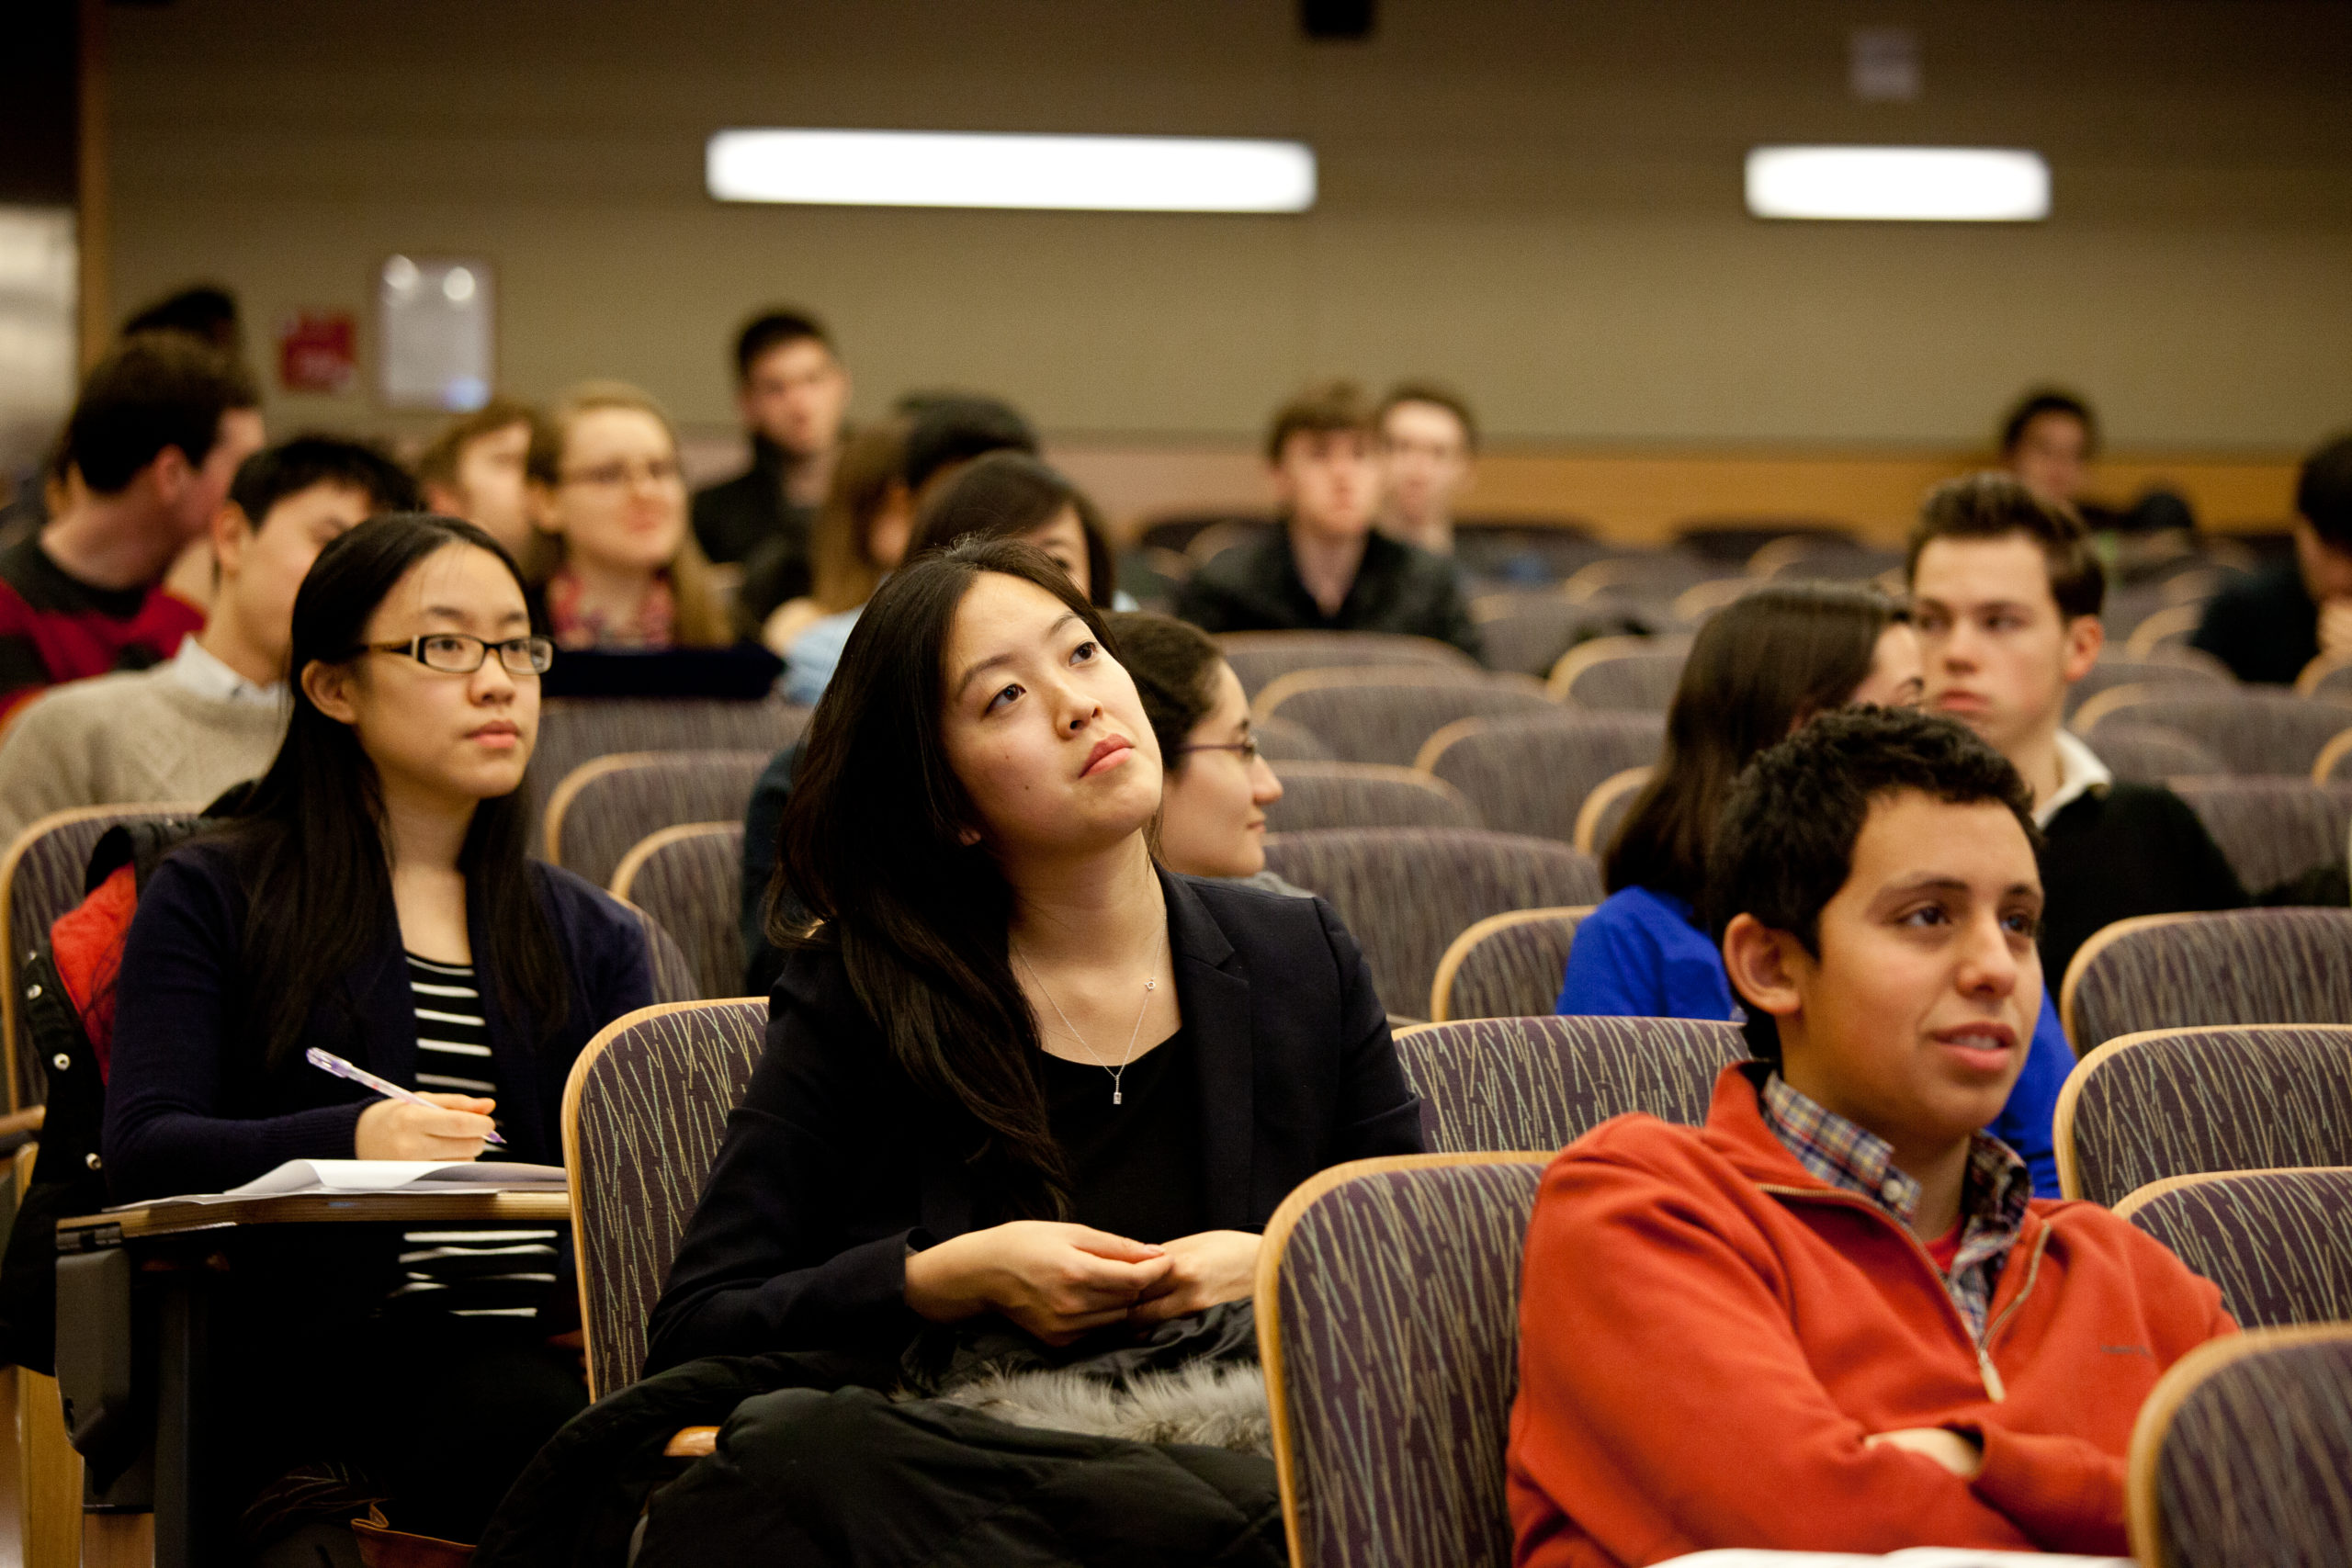 Students in a lecture hall.